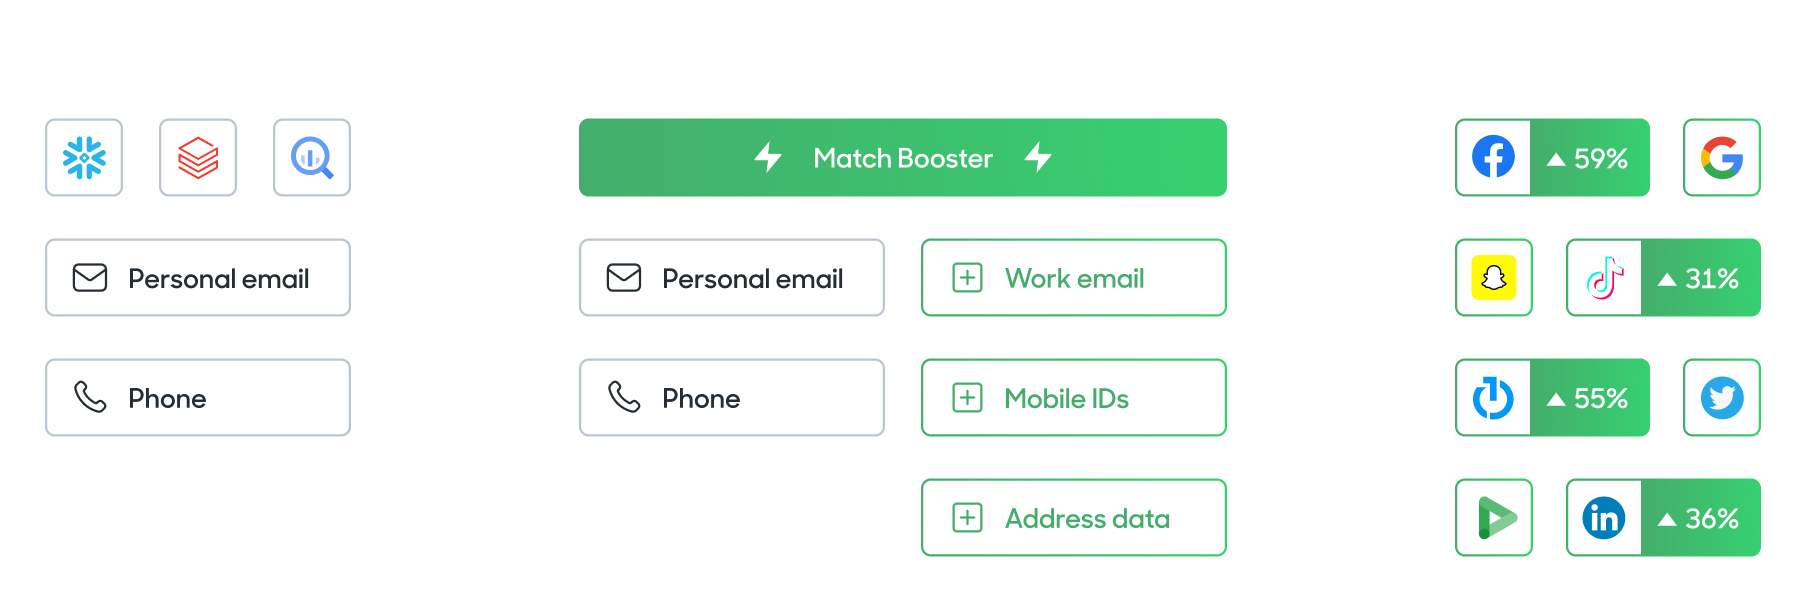 Customer data moving from your Data Warehouse, into Hightouch's Match Booster where first party data is added, and then into your ad platforms with increased match boosting rates.